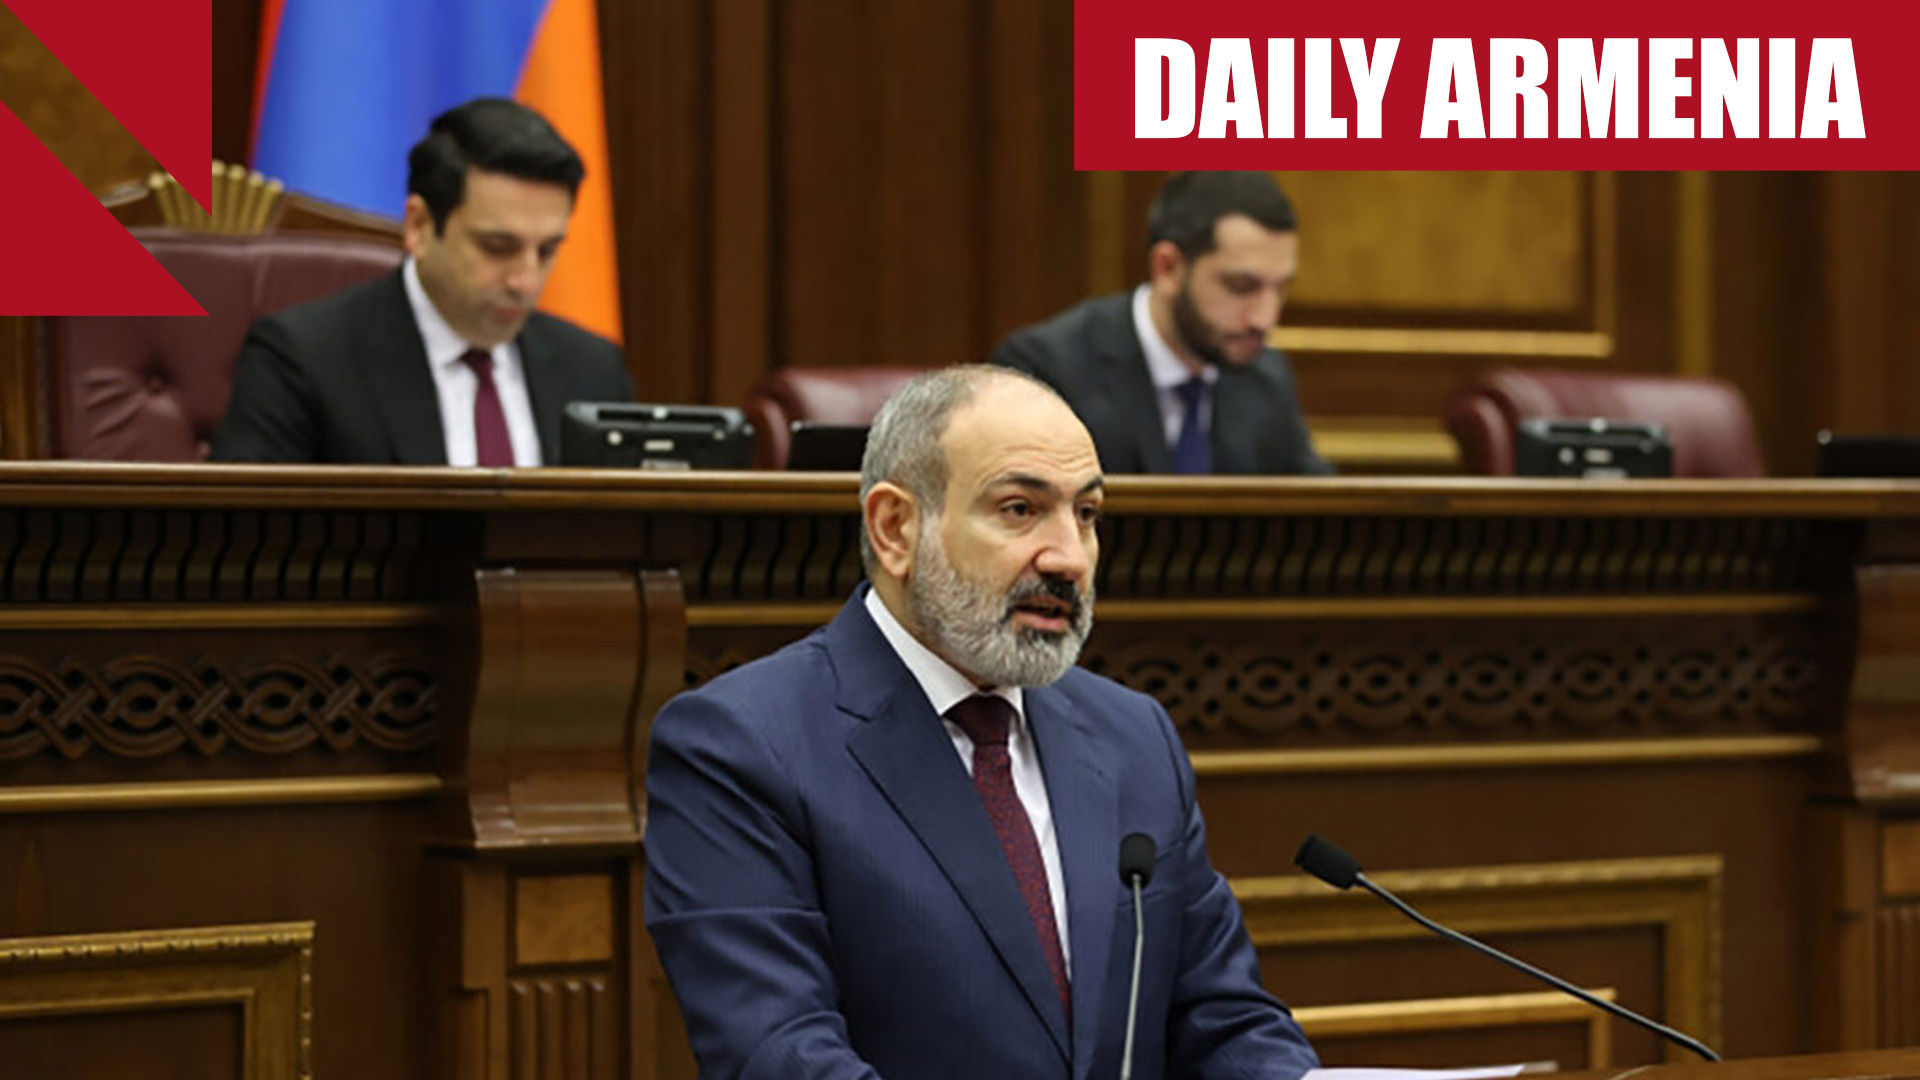 Pashinyan suggests in parliament he has no responsibility for Karabakh crisis